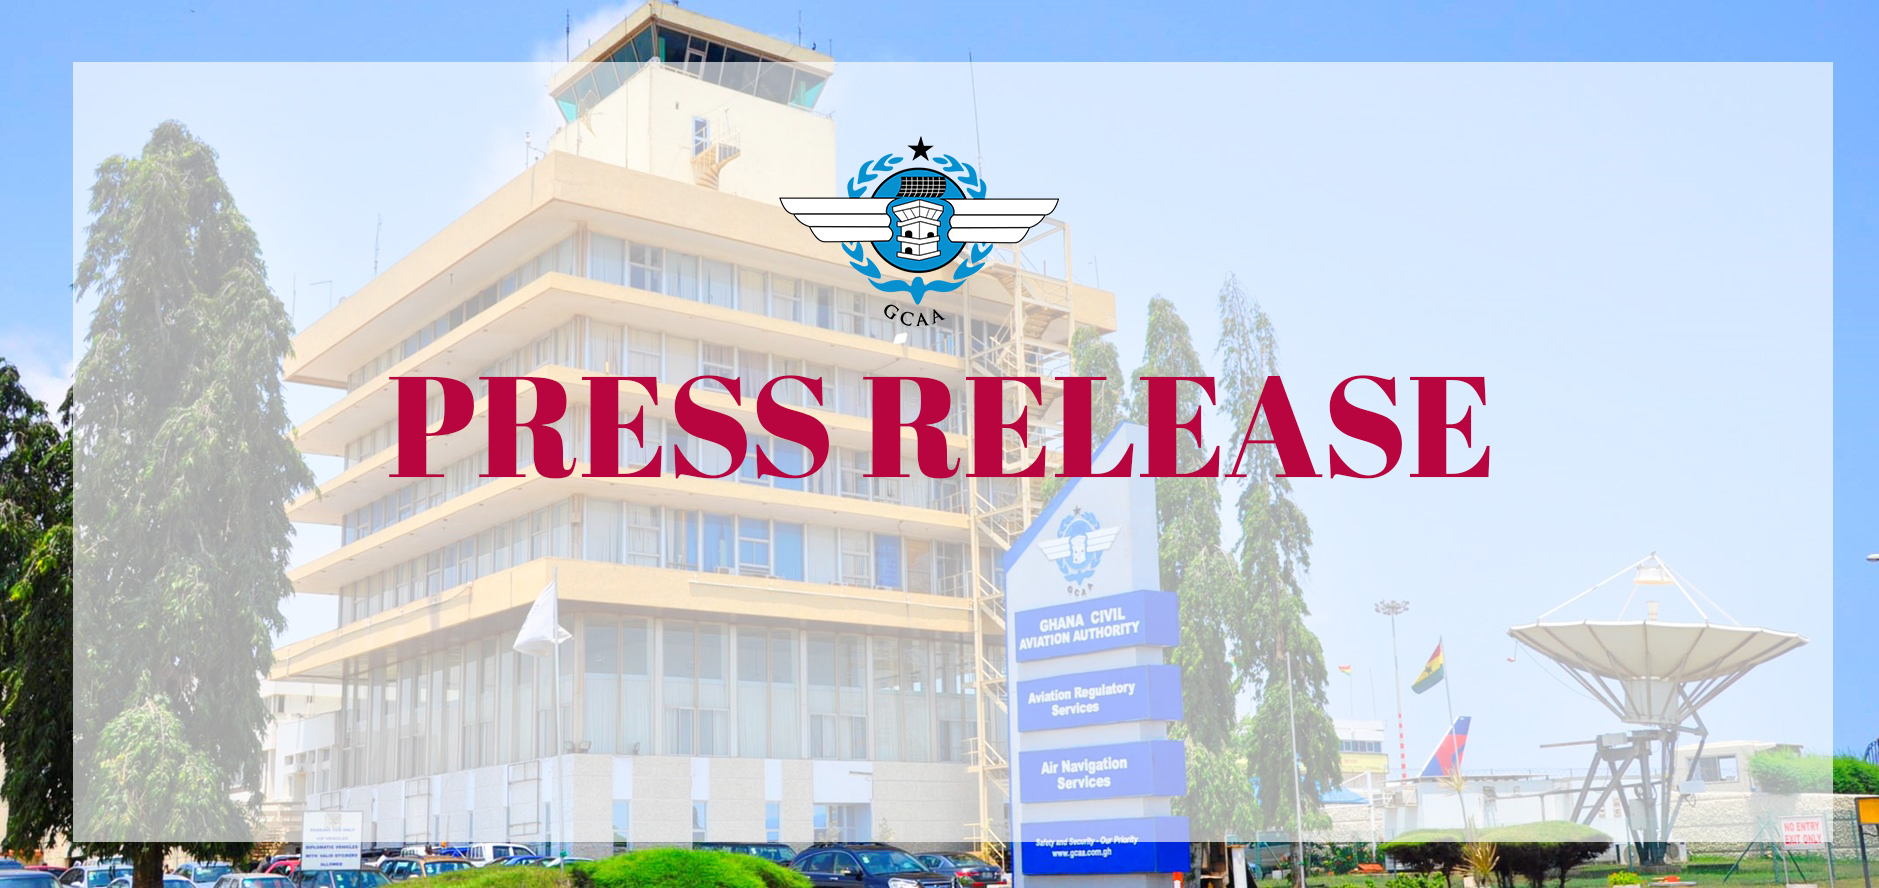 PRESS RELEASE – BRITISH AIRWAYS FLIGHT BA081 BOUND FOR ACCRA RETURNS MIDFLIGHT TO LONDON DUE TO CLOSURE OF MALIAN AIRSPACE